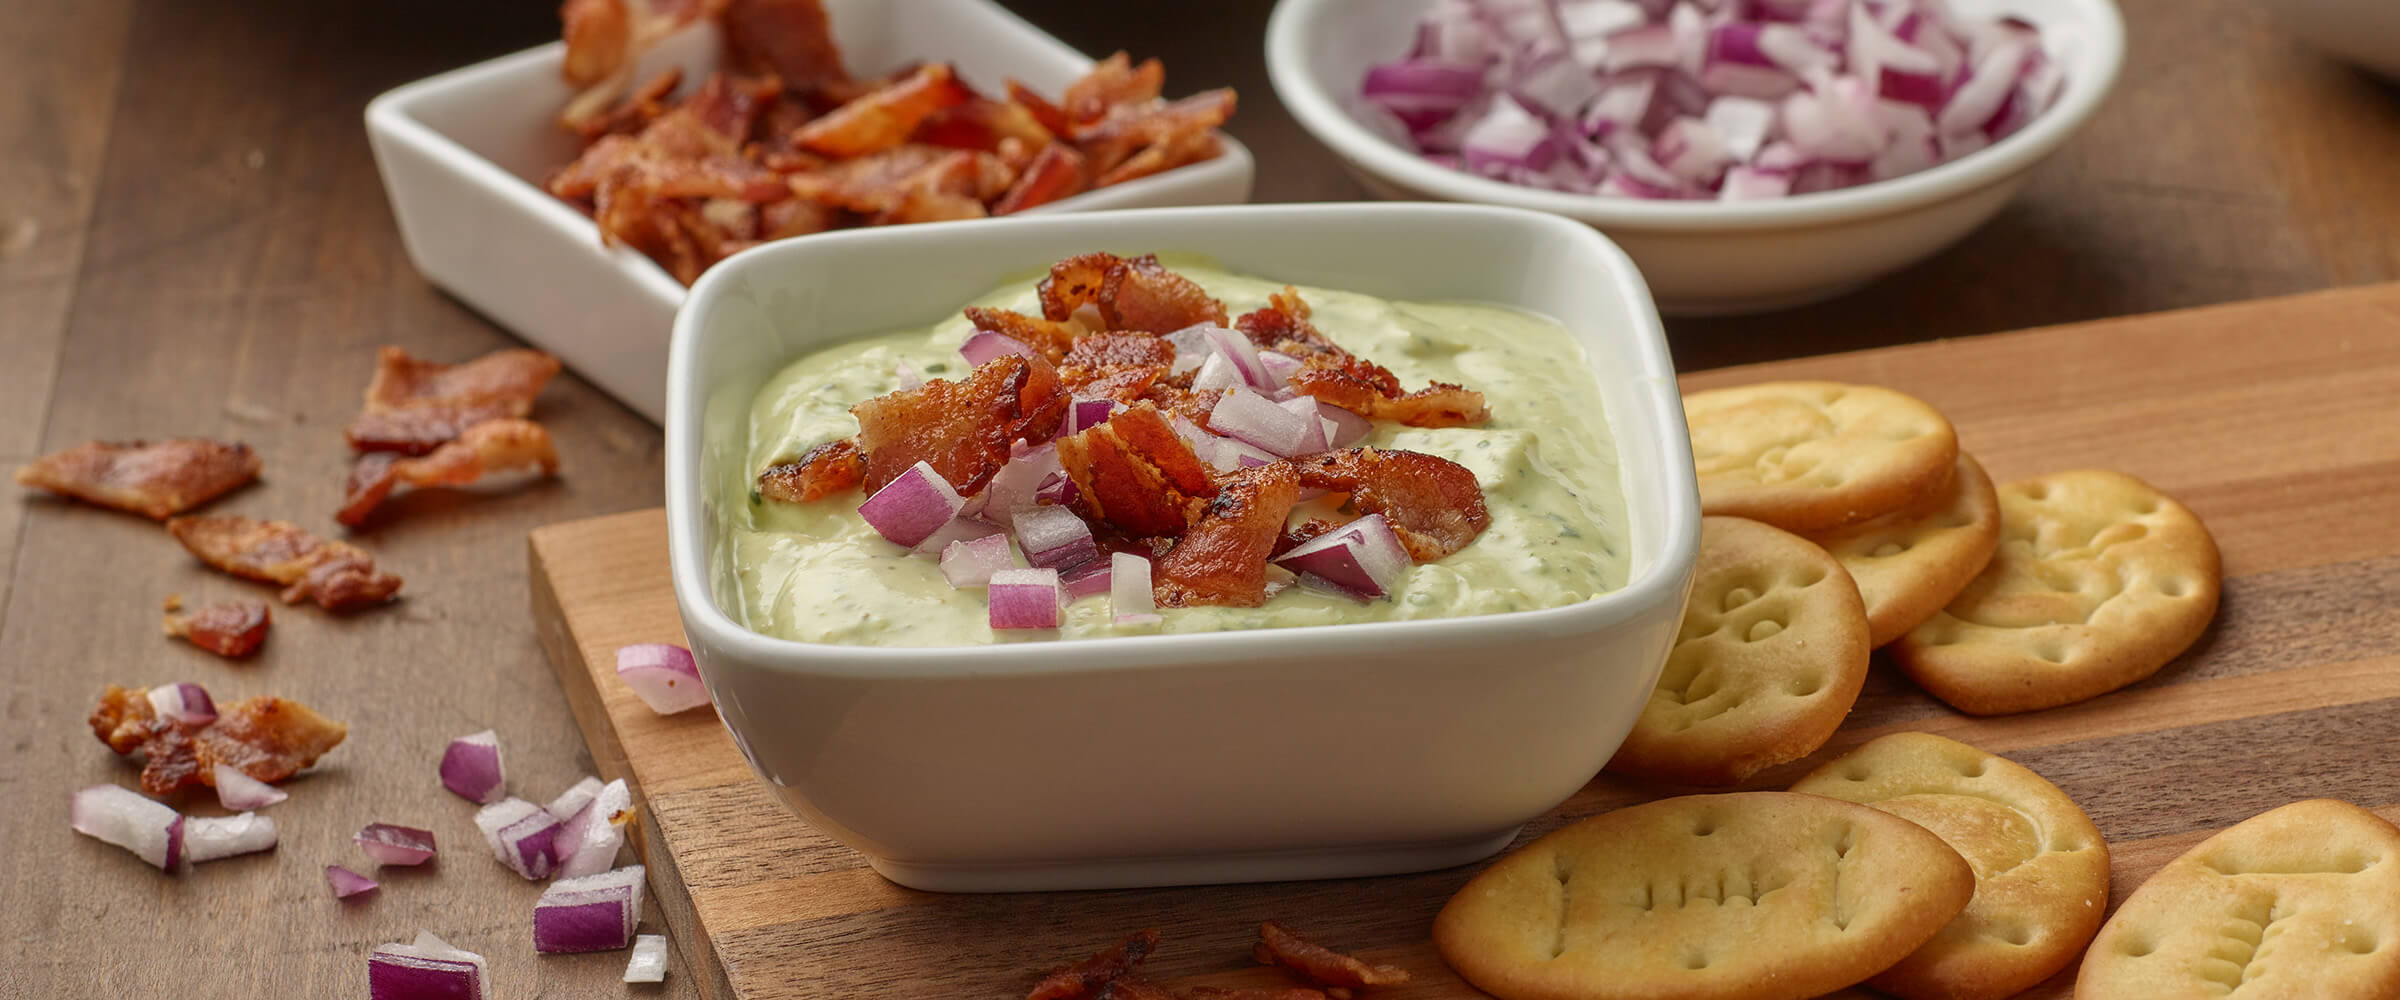 Creamy Avocado Jalapeno Dip topped with bacon and red onions in white bowl with crackers on the side